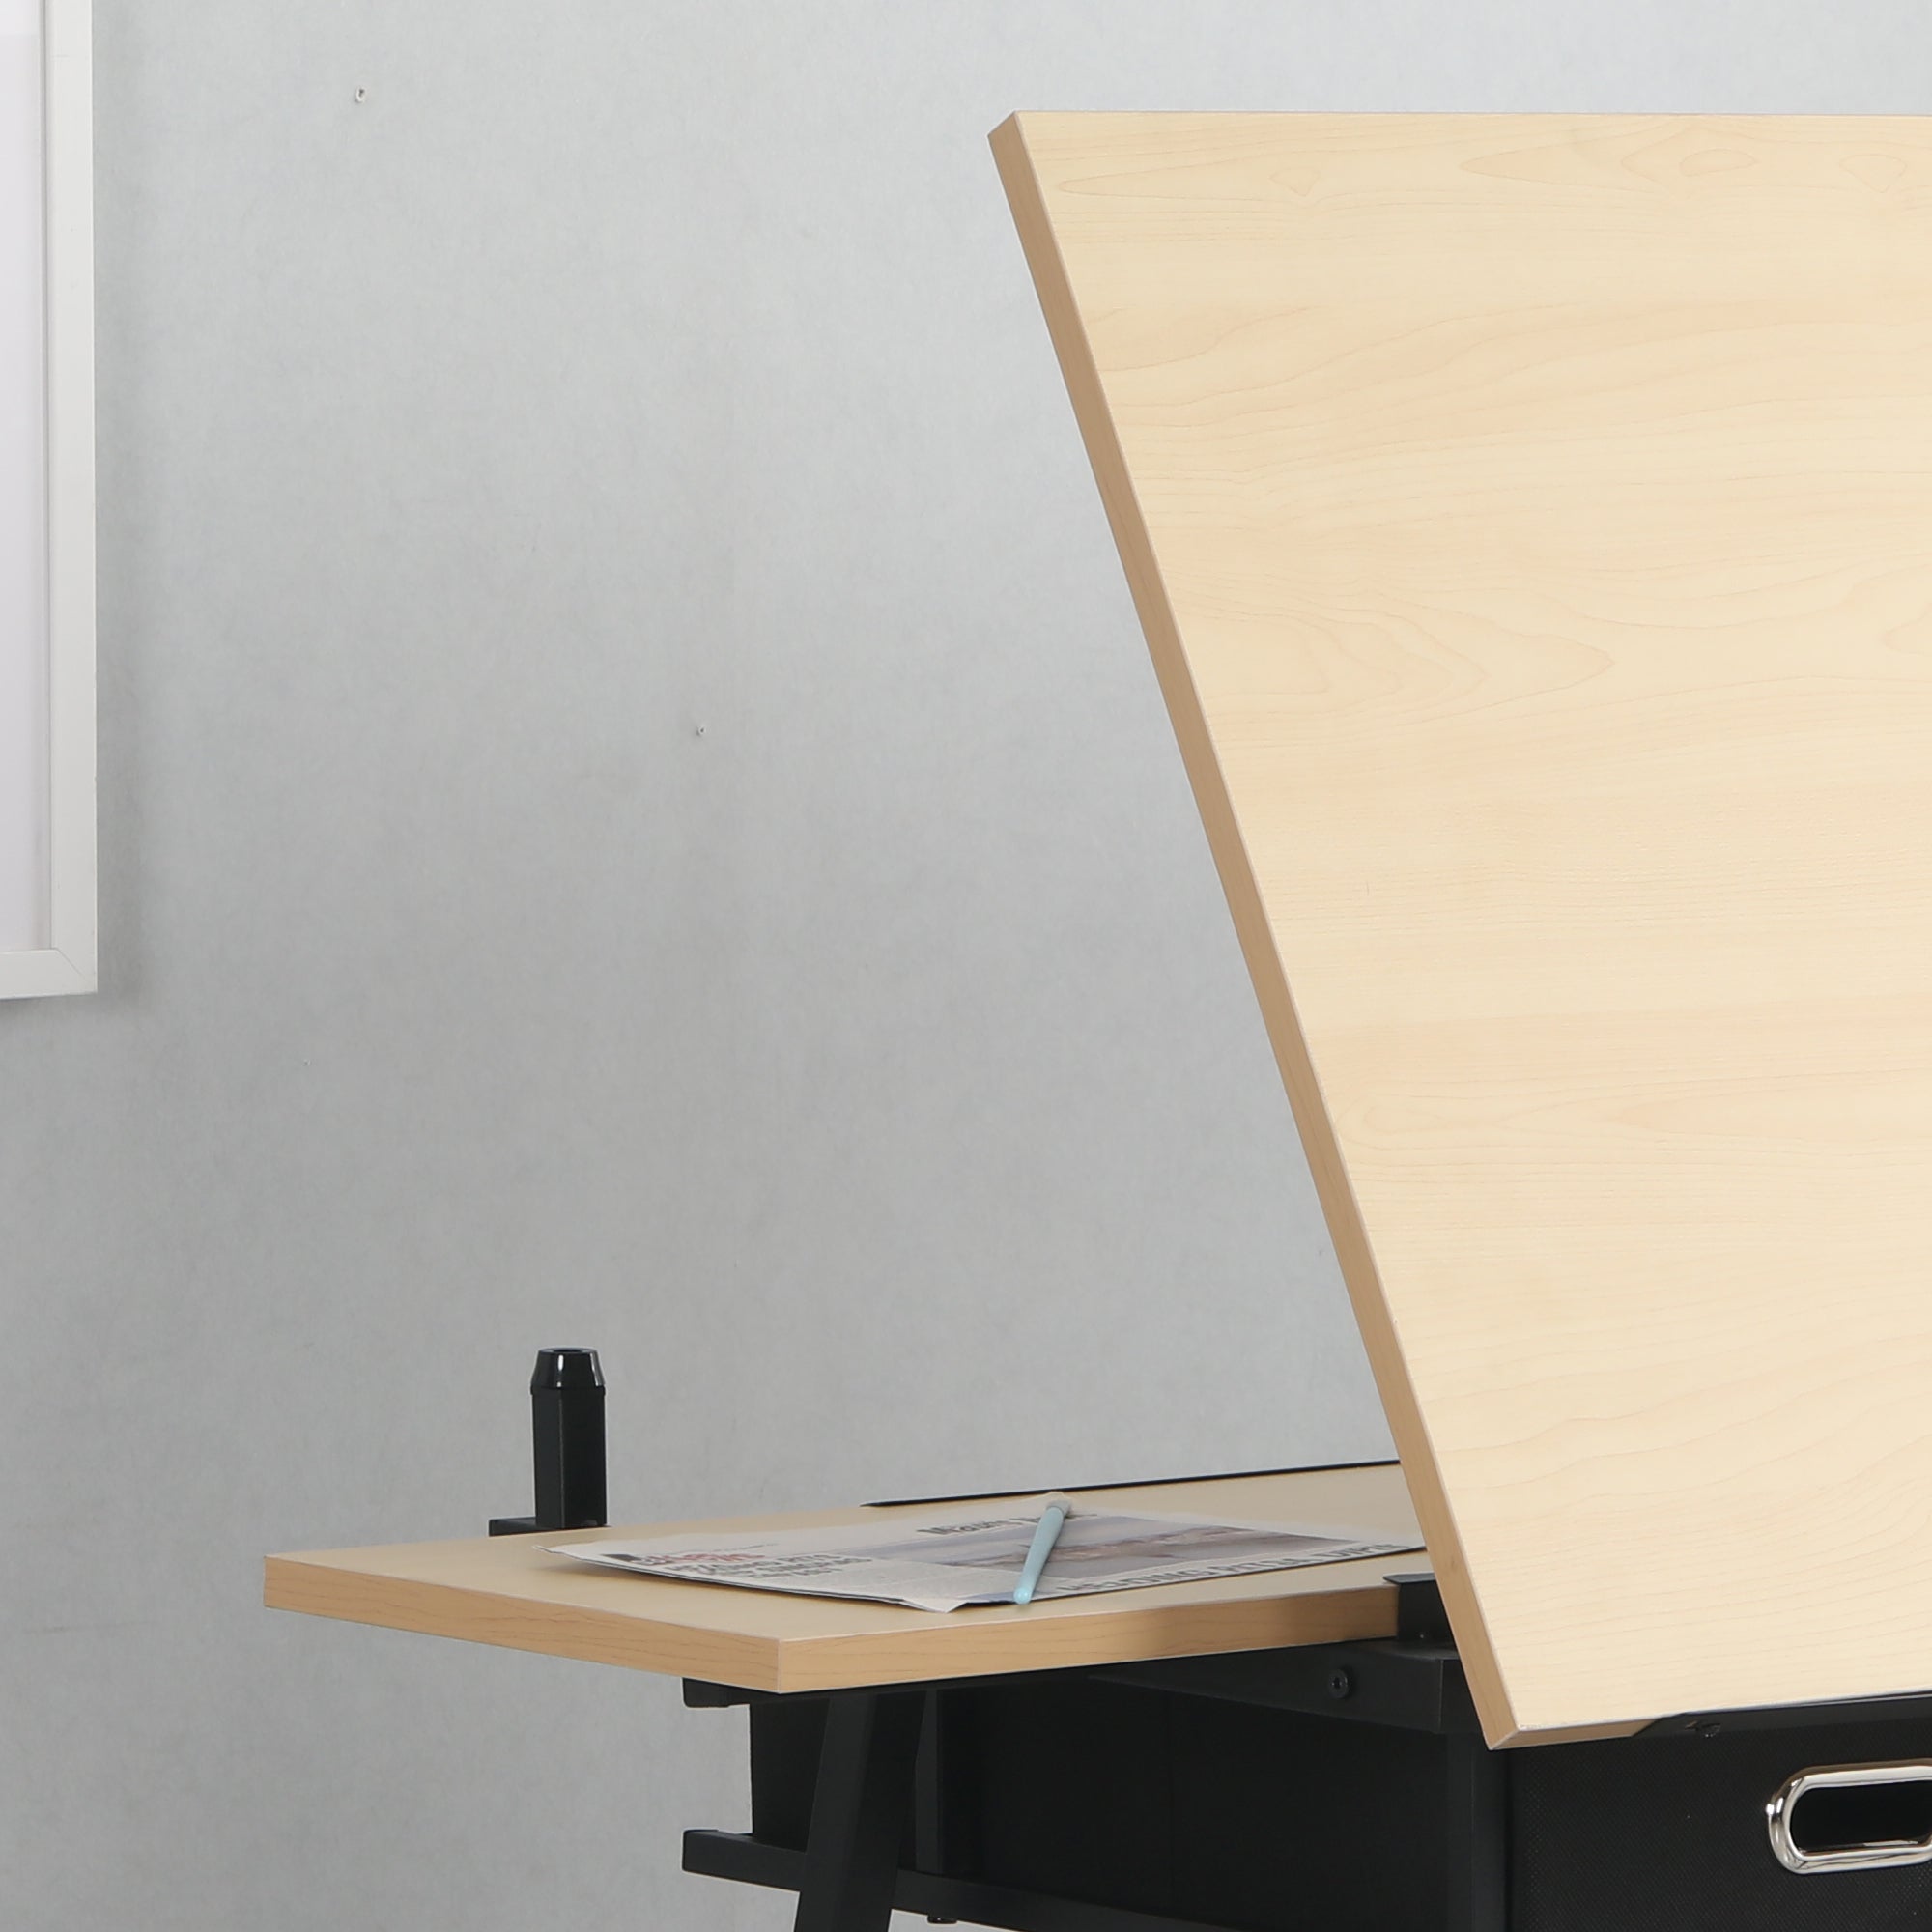 Adjustable drawing drafting table desk with 2 drawers for home office and school with stool